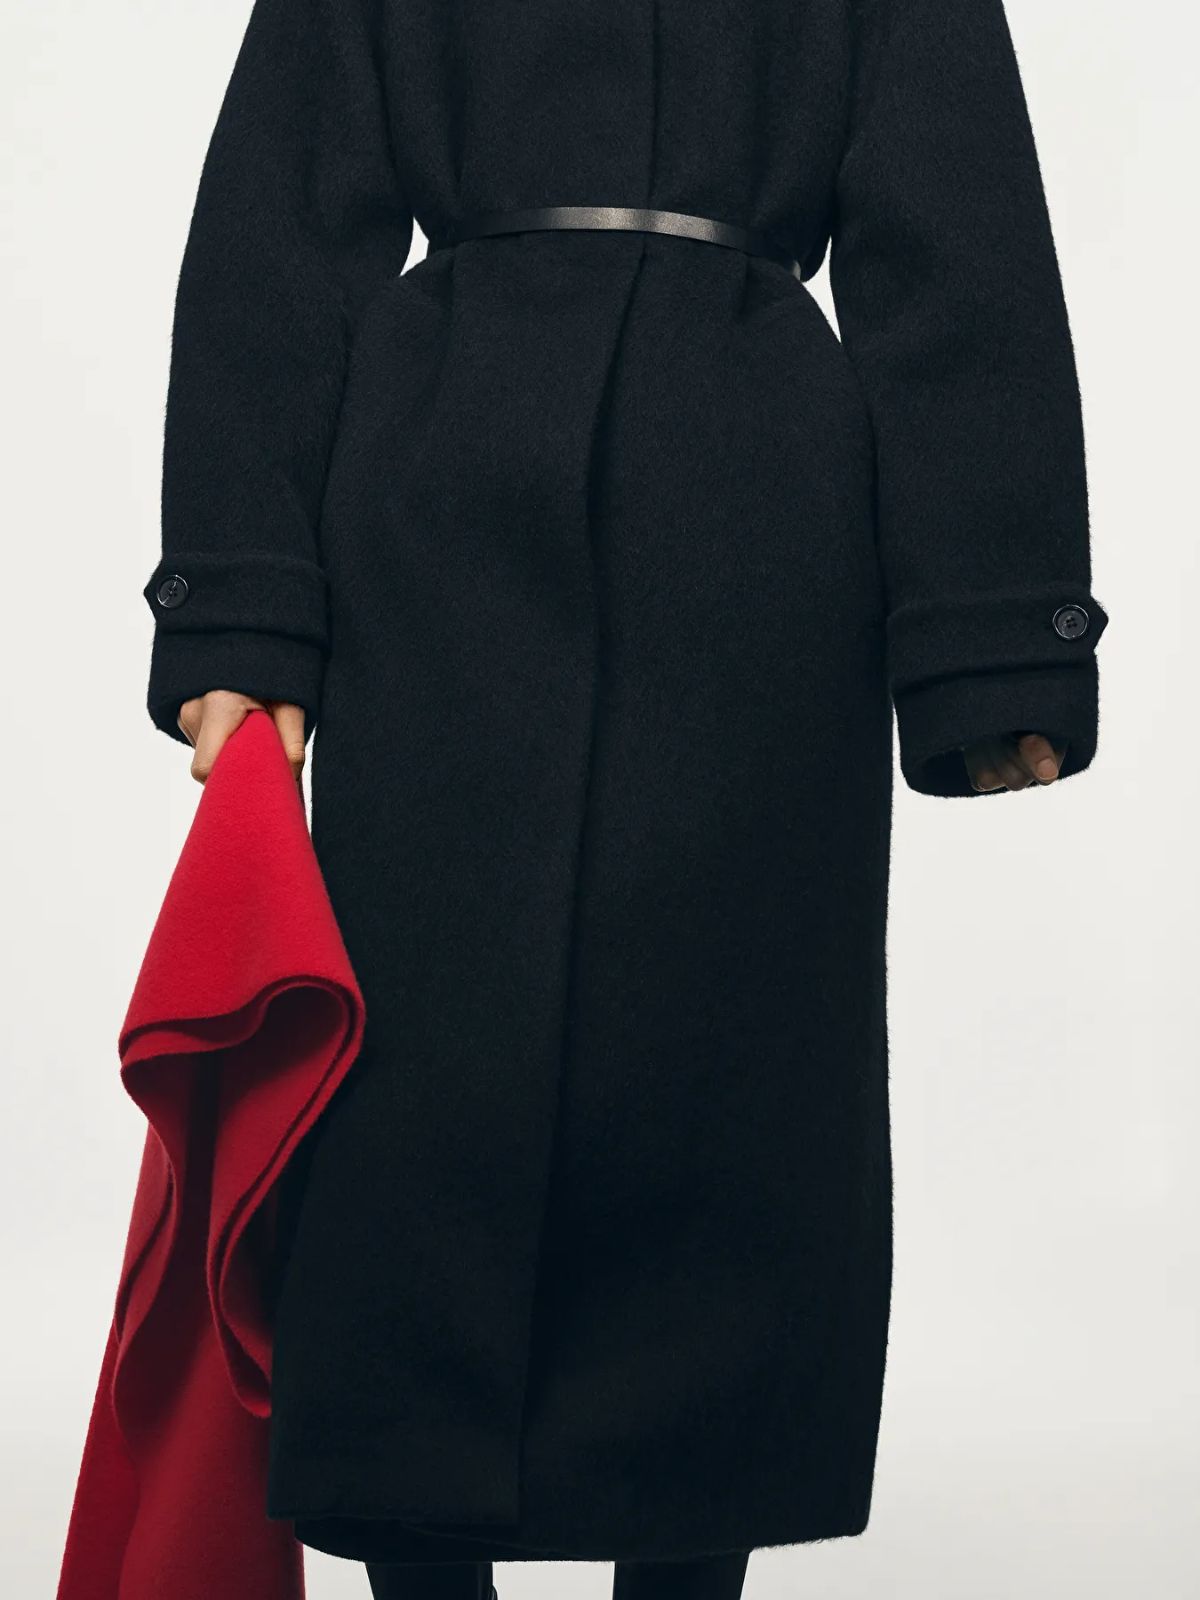 Oversized Wool Coat Black, Red Wool Scarf Arket Holiday Essentials